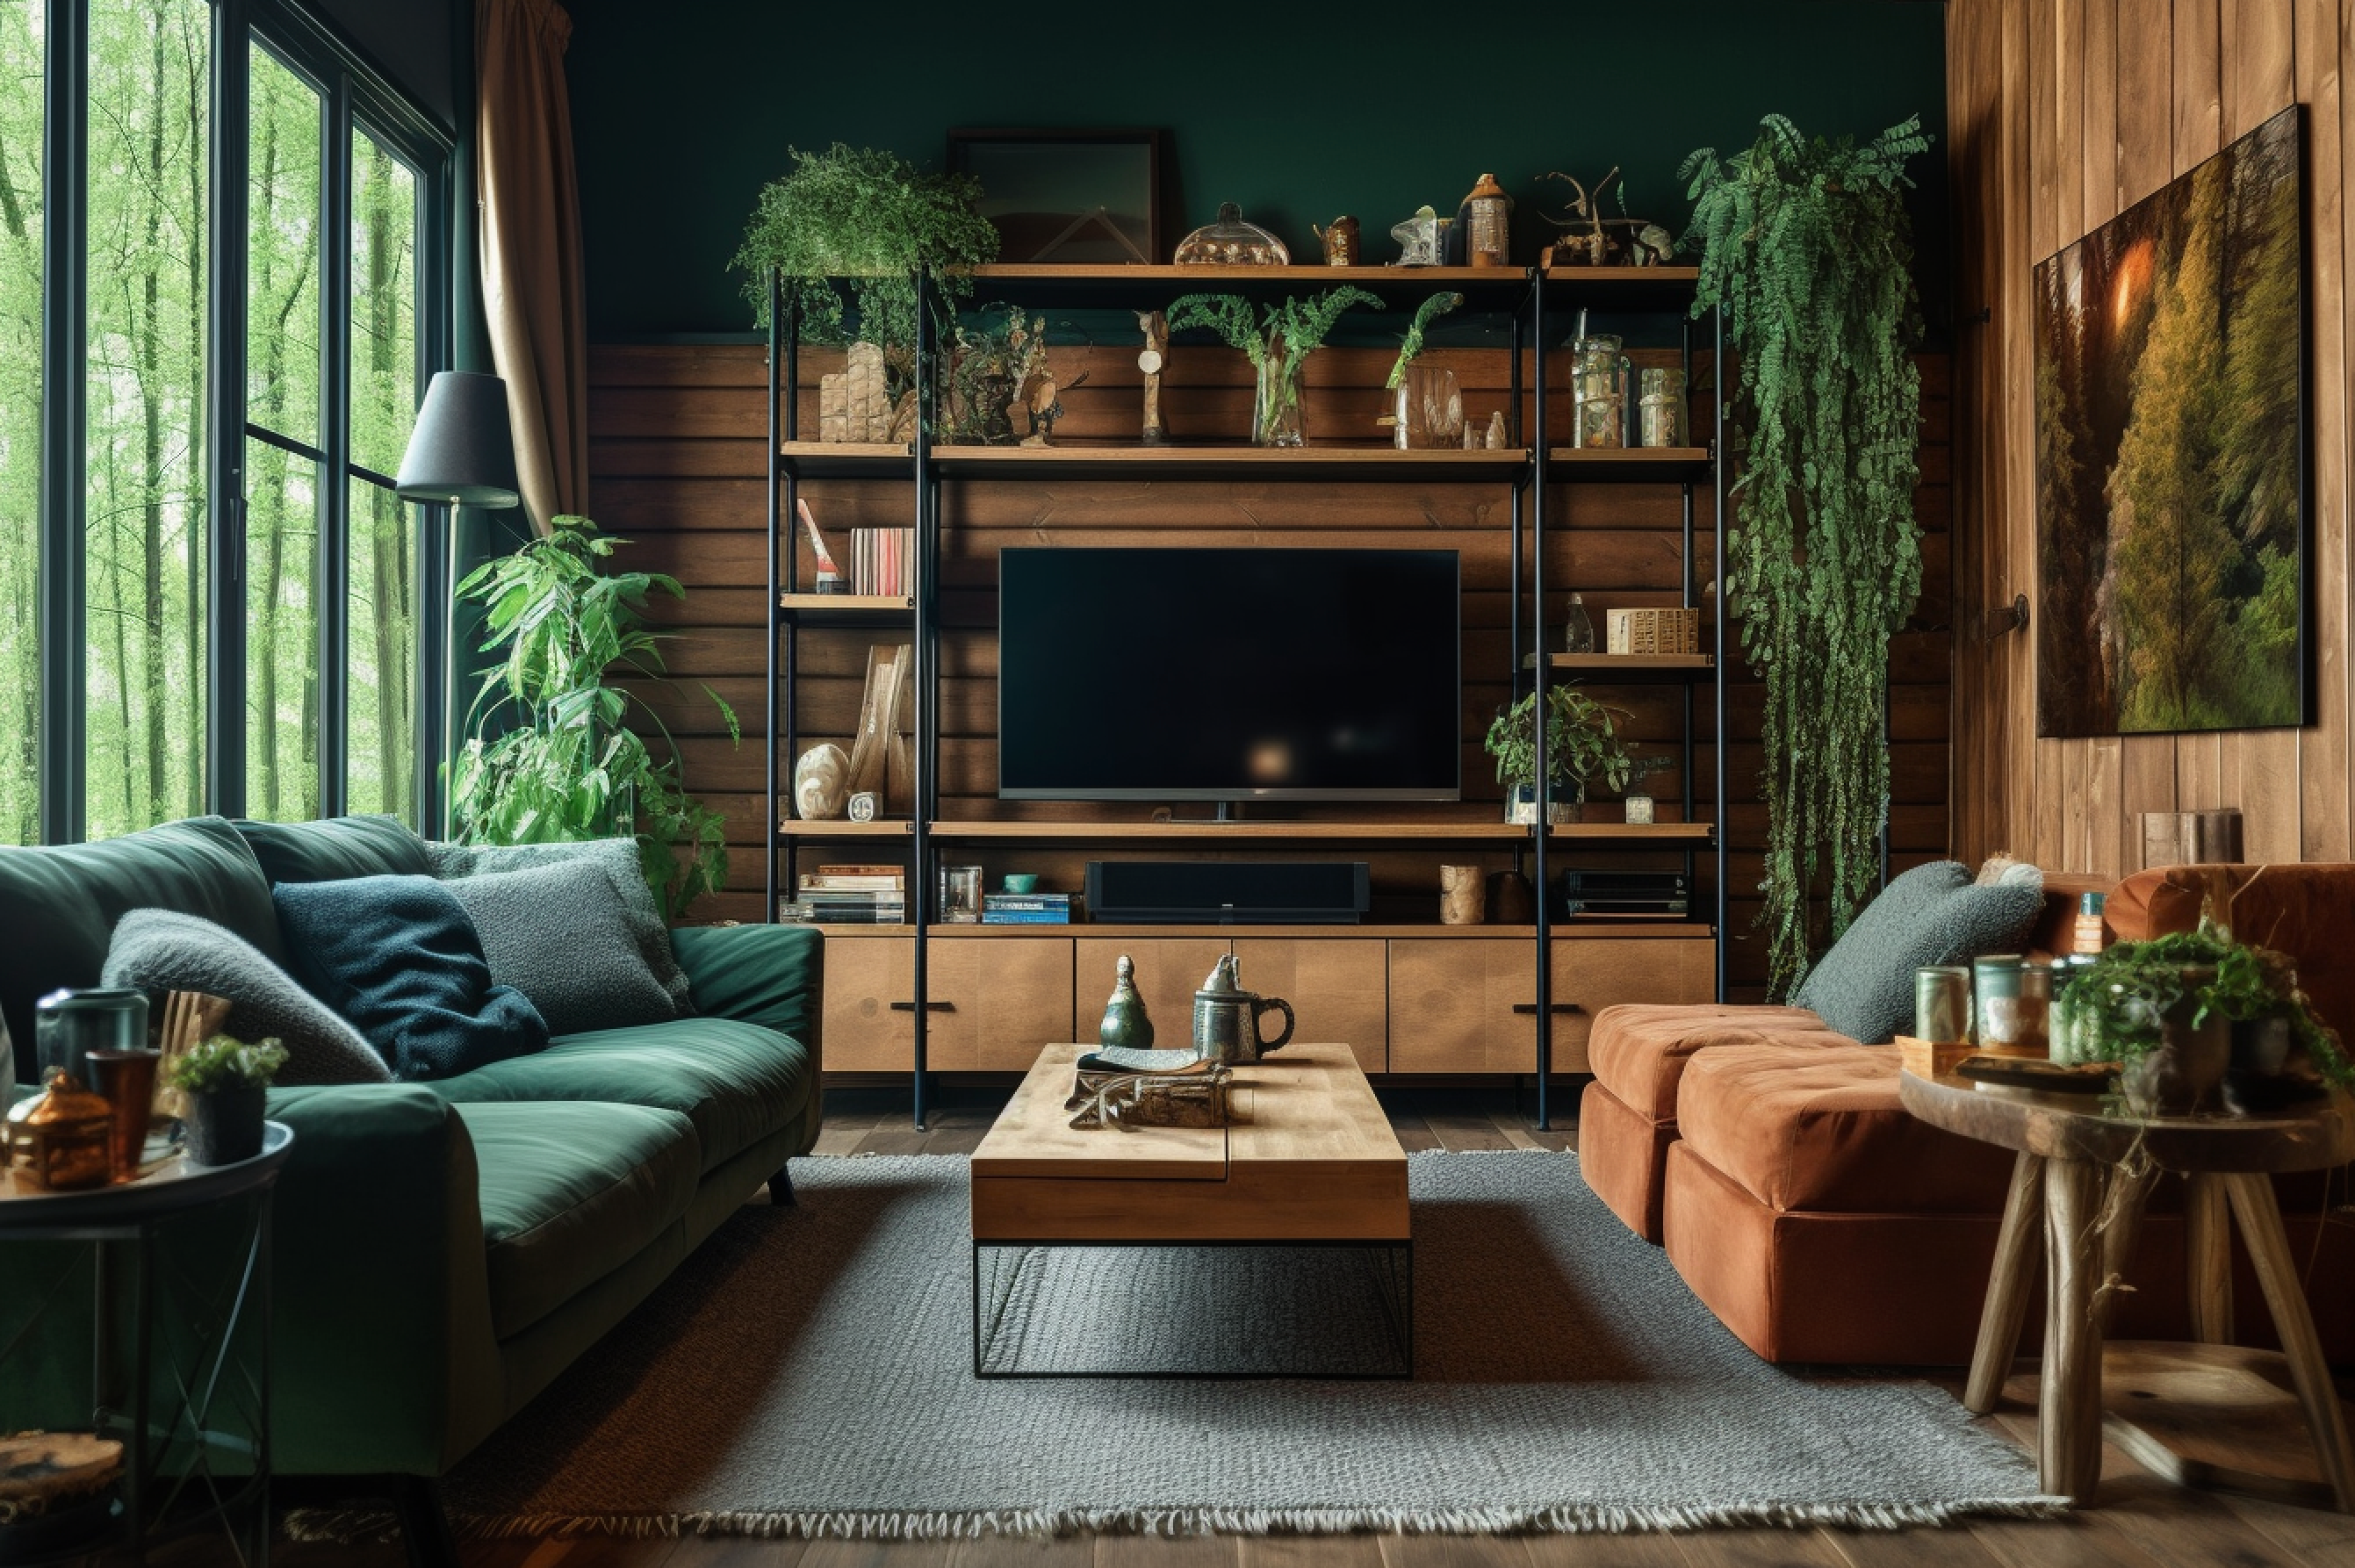 Image of a woodland-inspired living room featuring rustic chestnut furniture against deep forest green painted walls.